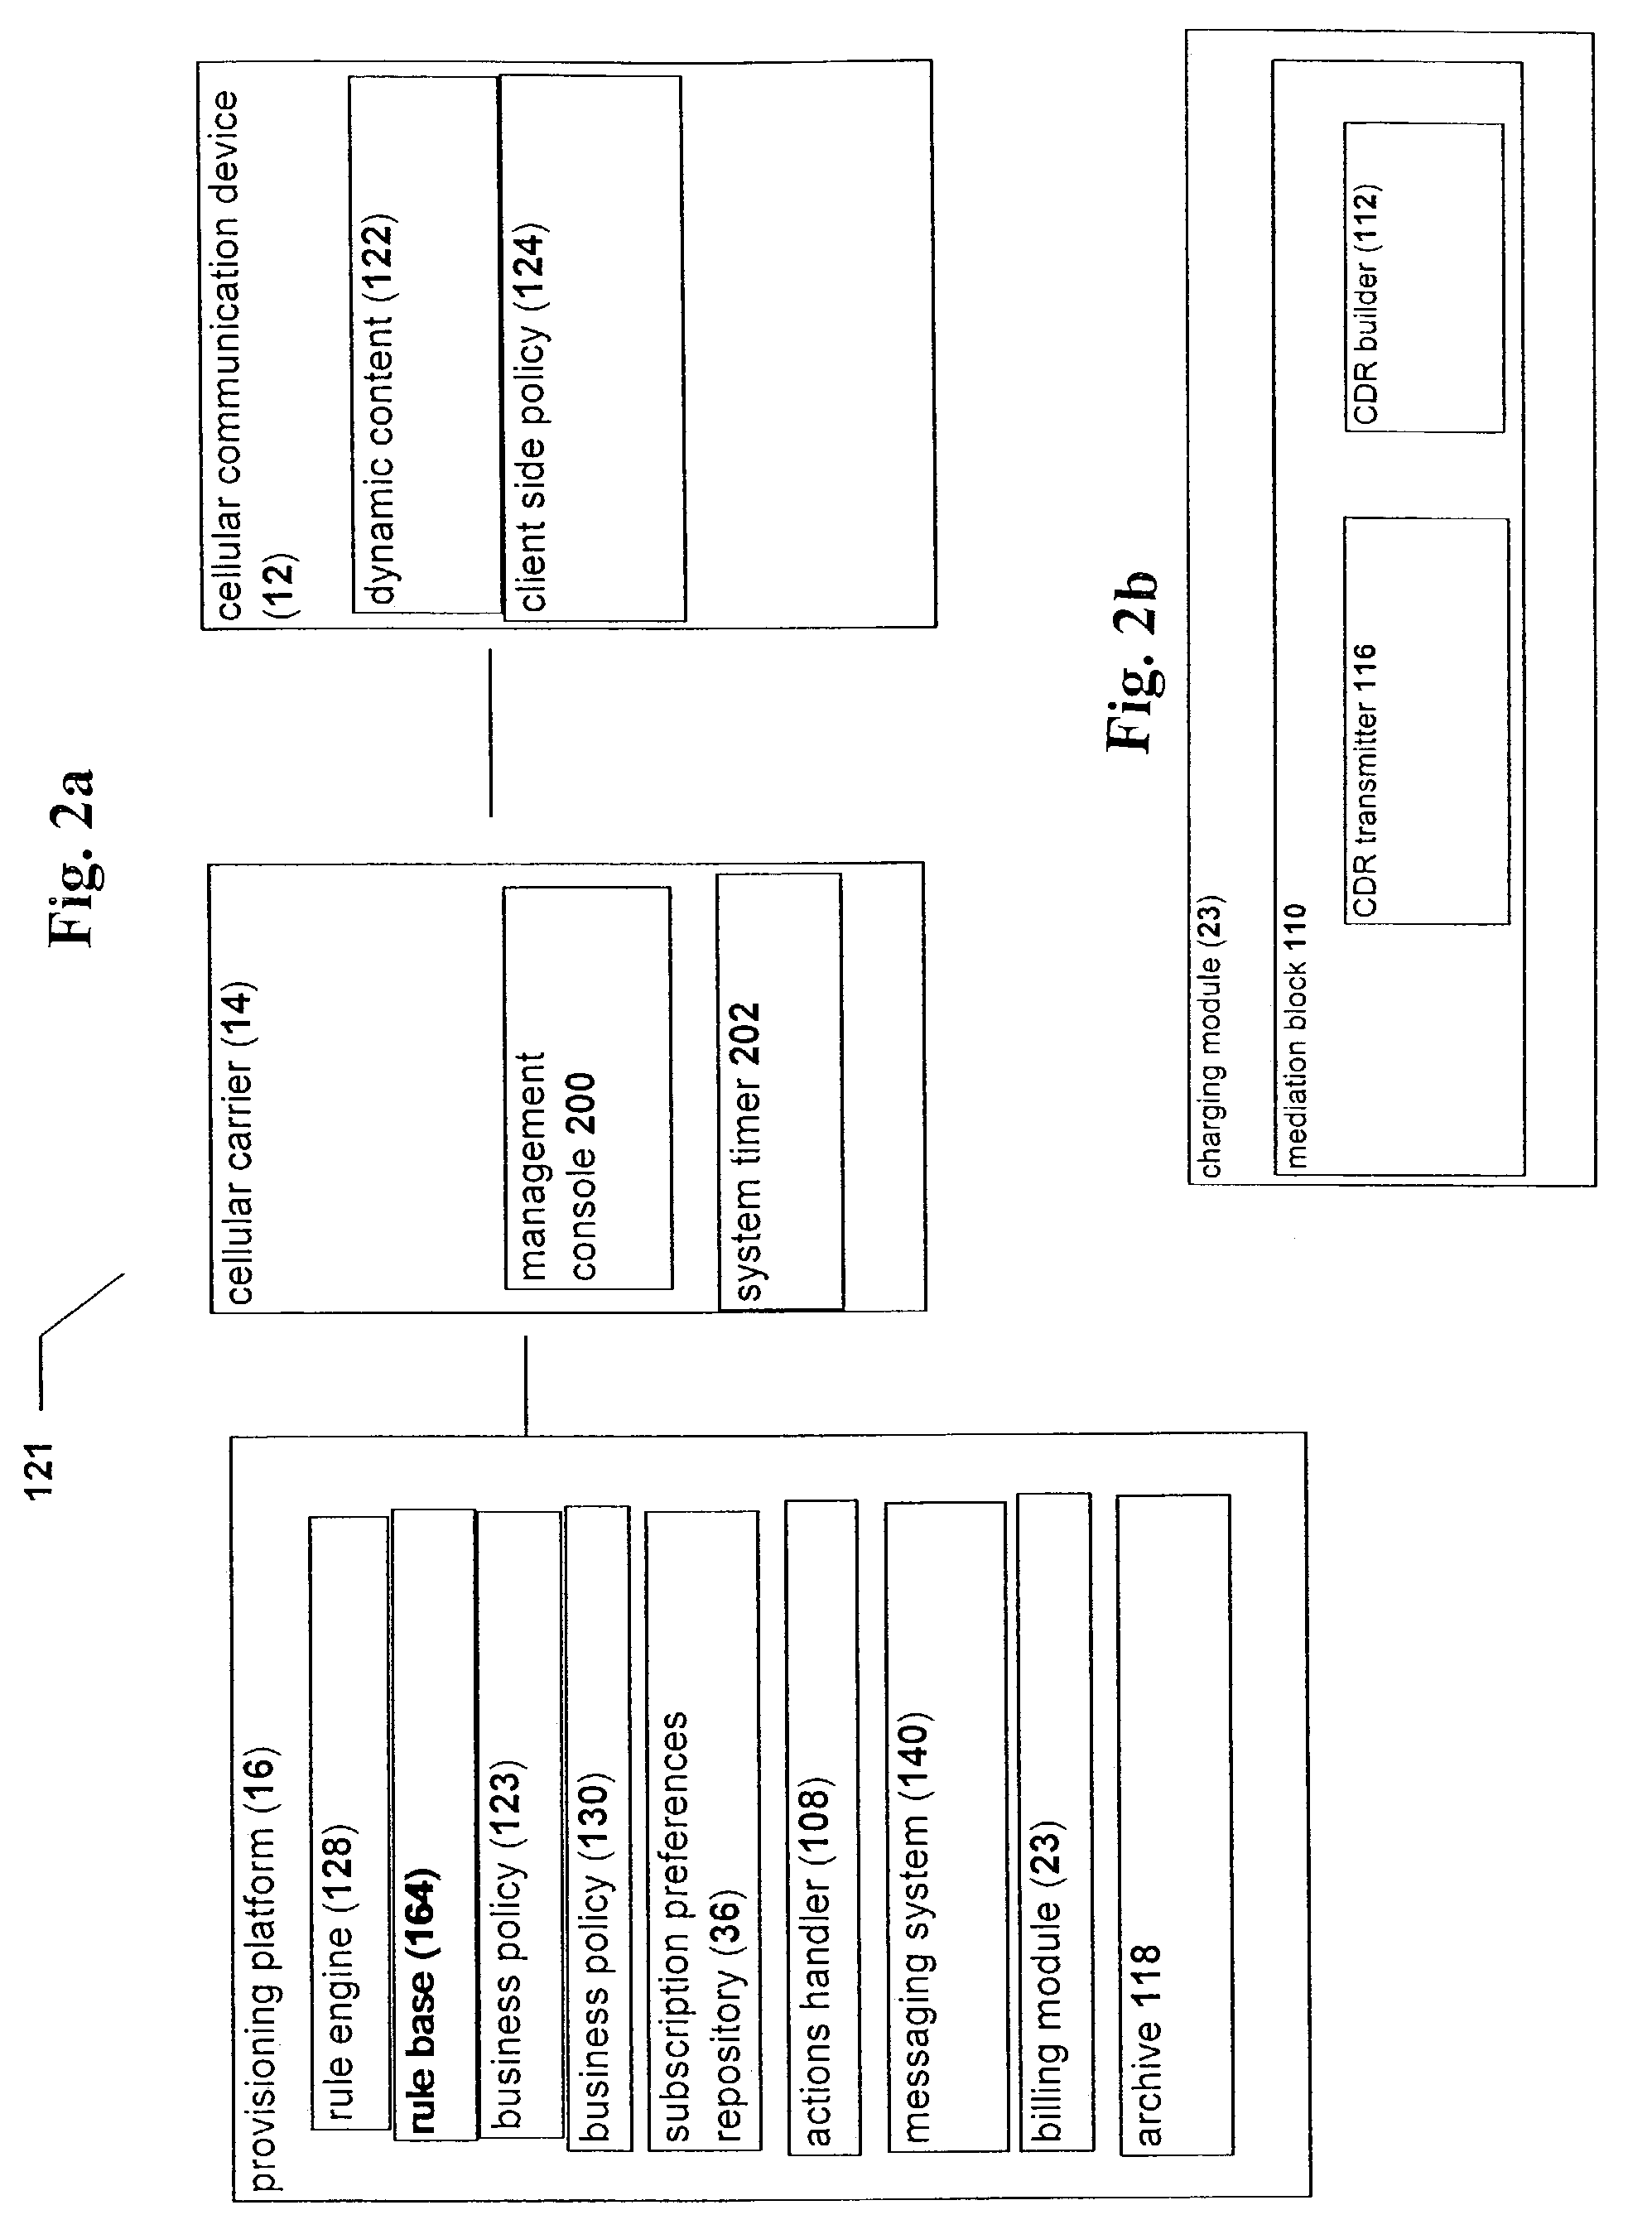 Rule-based system and method for managing the provisioning of user applications on limited-resource and/or wireless devices